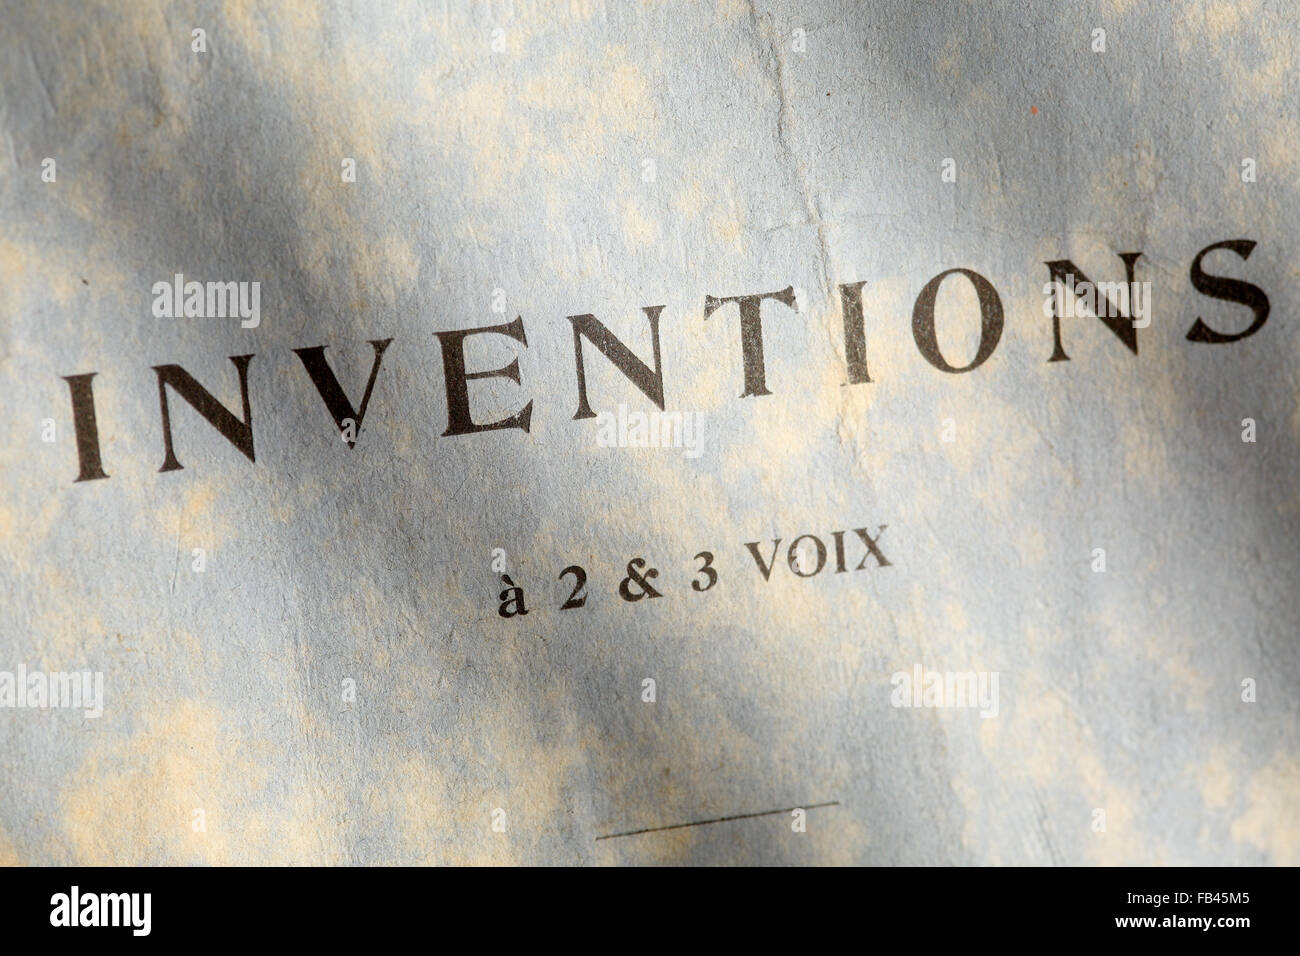 Bach's inventions for 2 and 3 voices Stock Photo